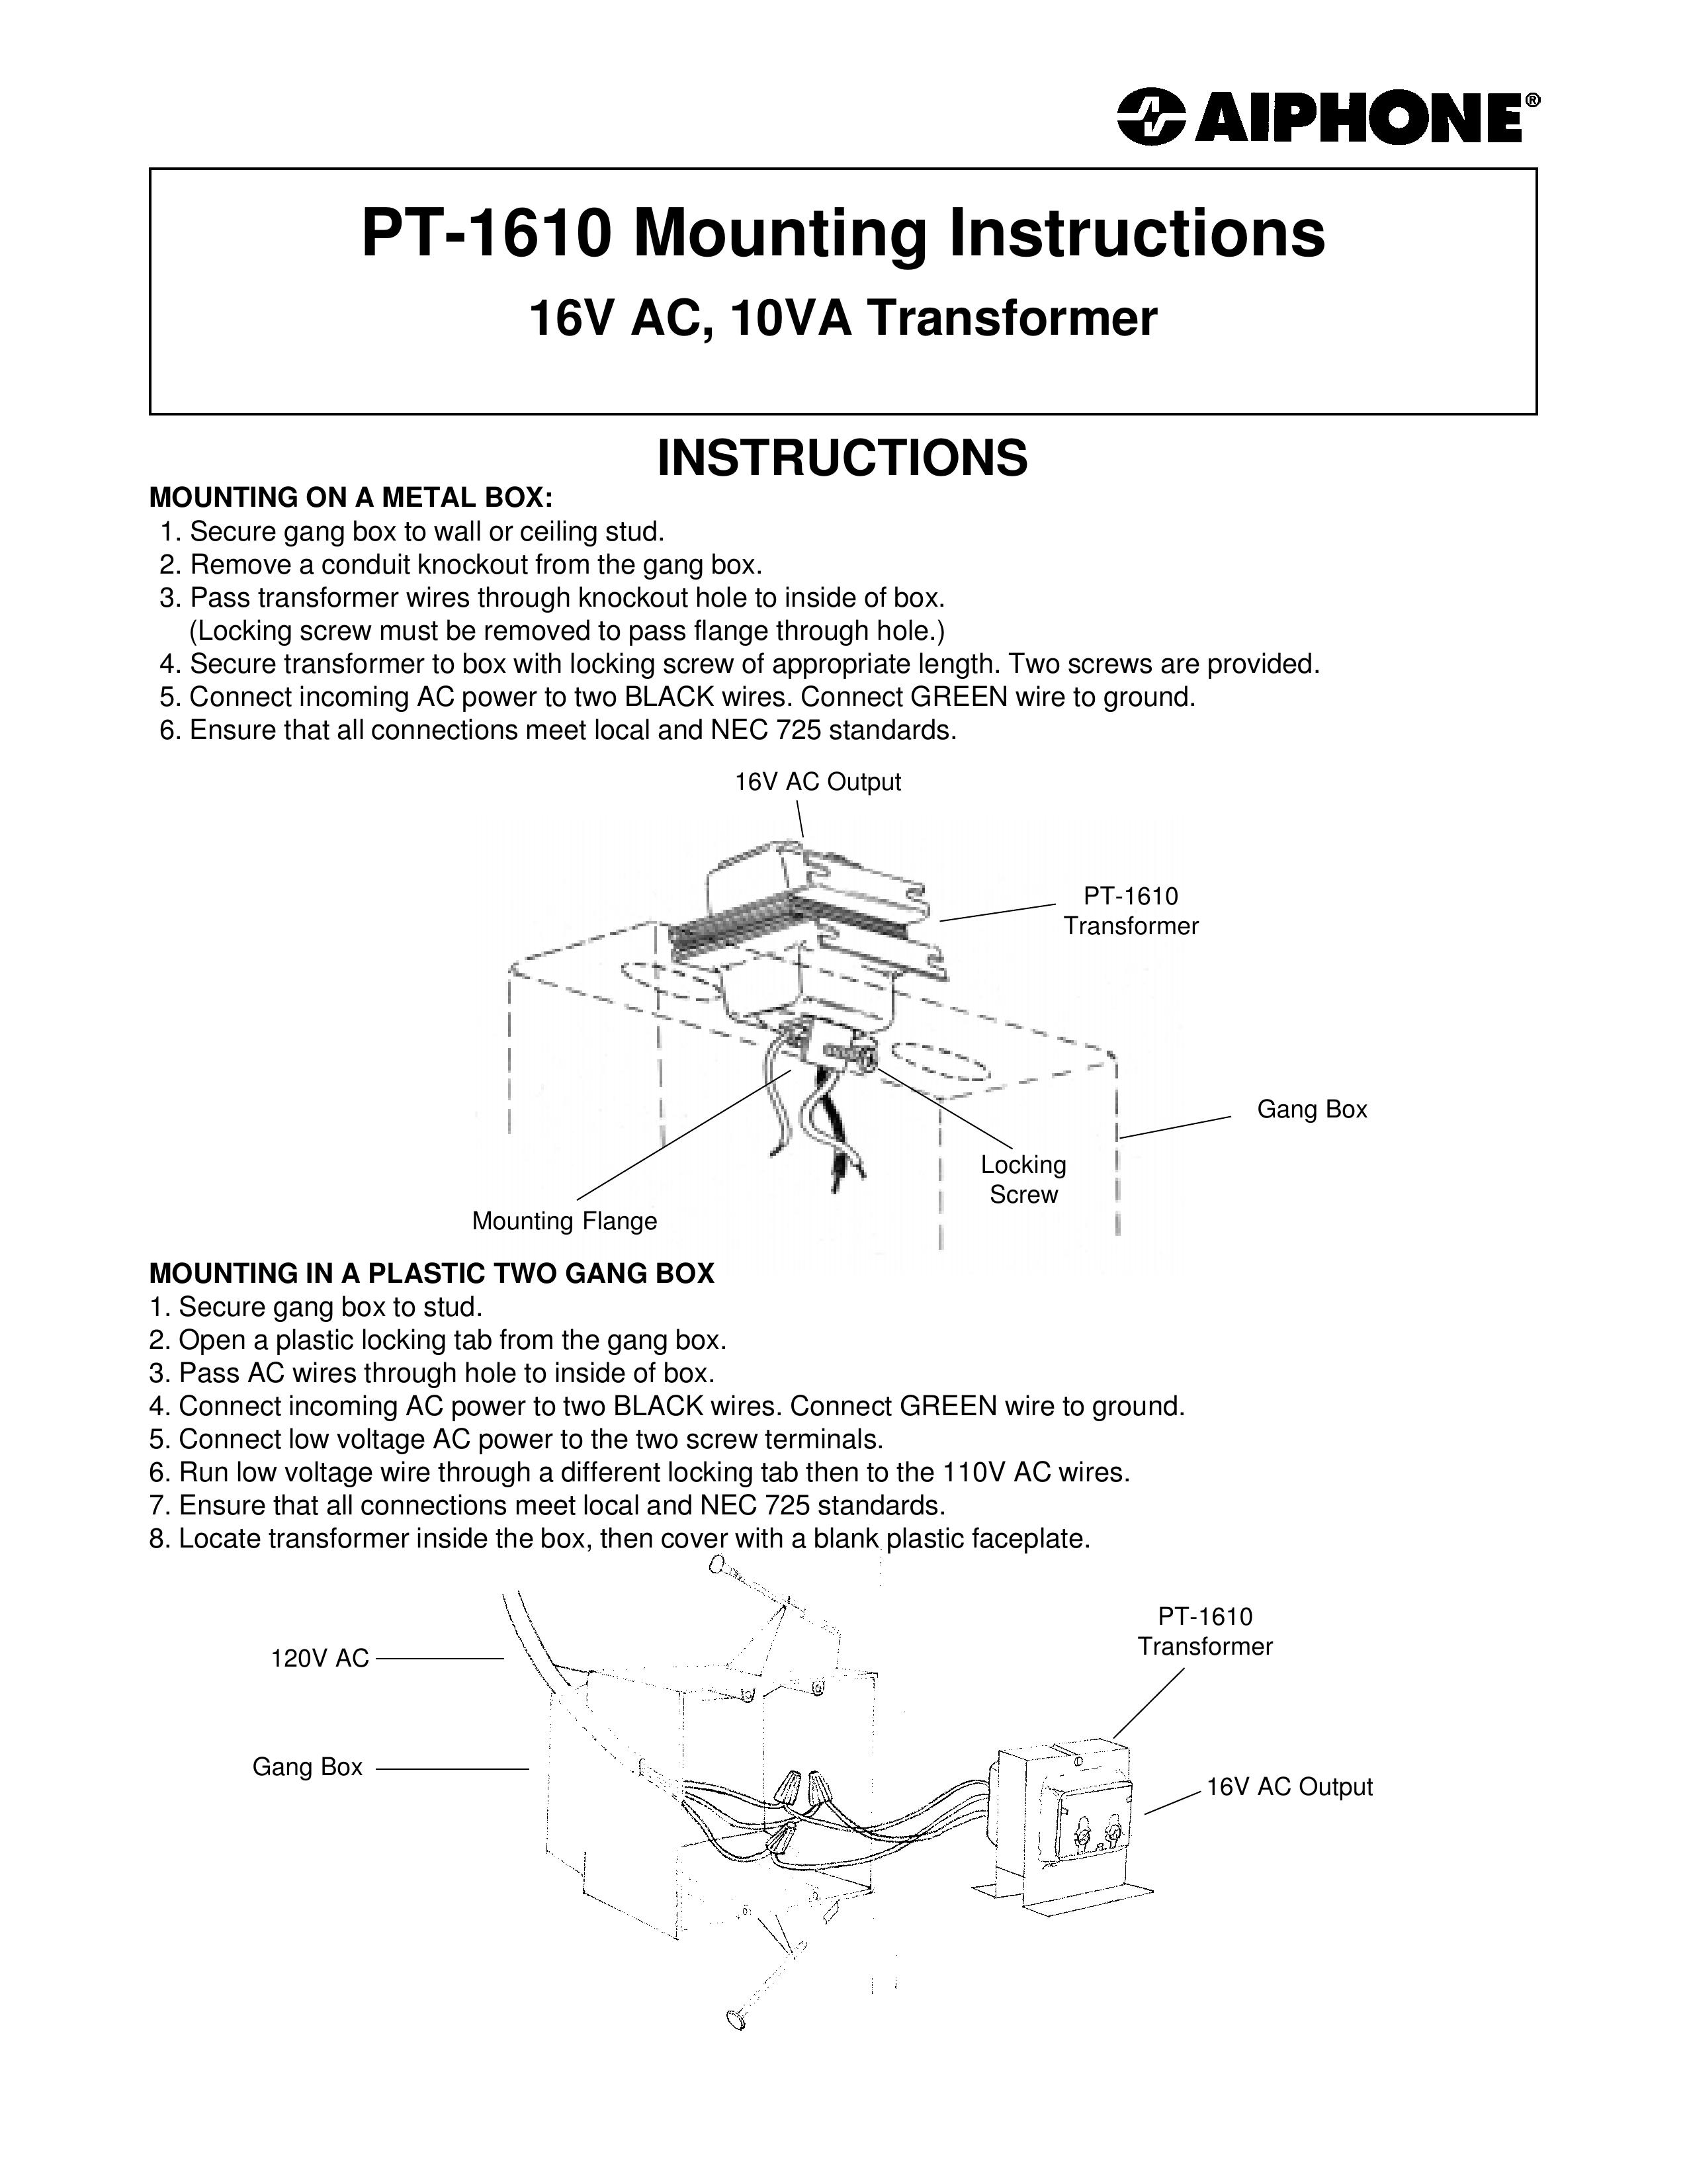 Aiphone PT-1610 Personal Lift User Manual